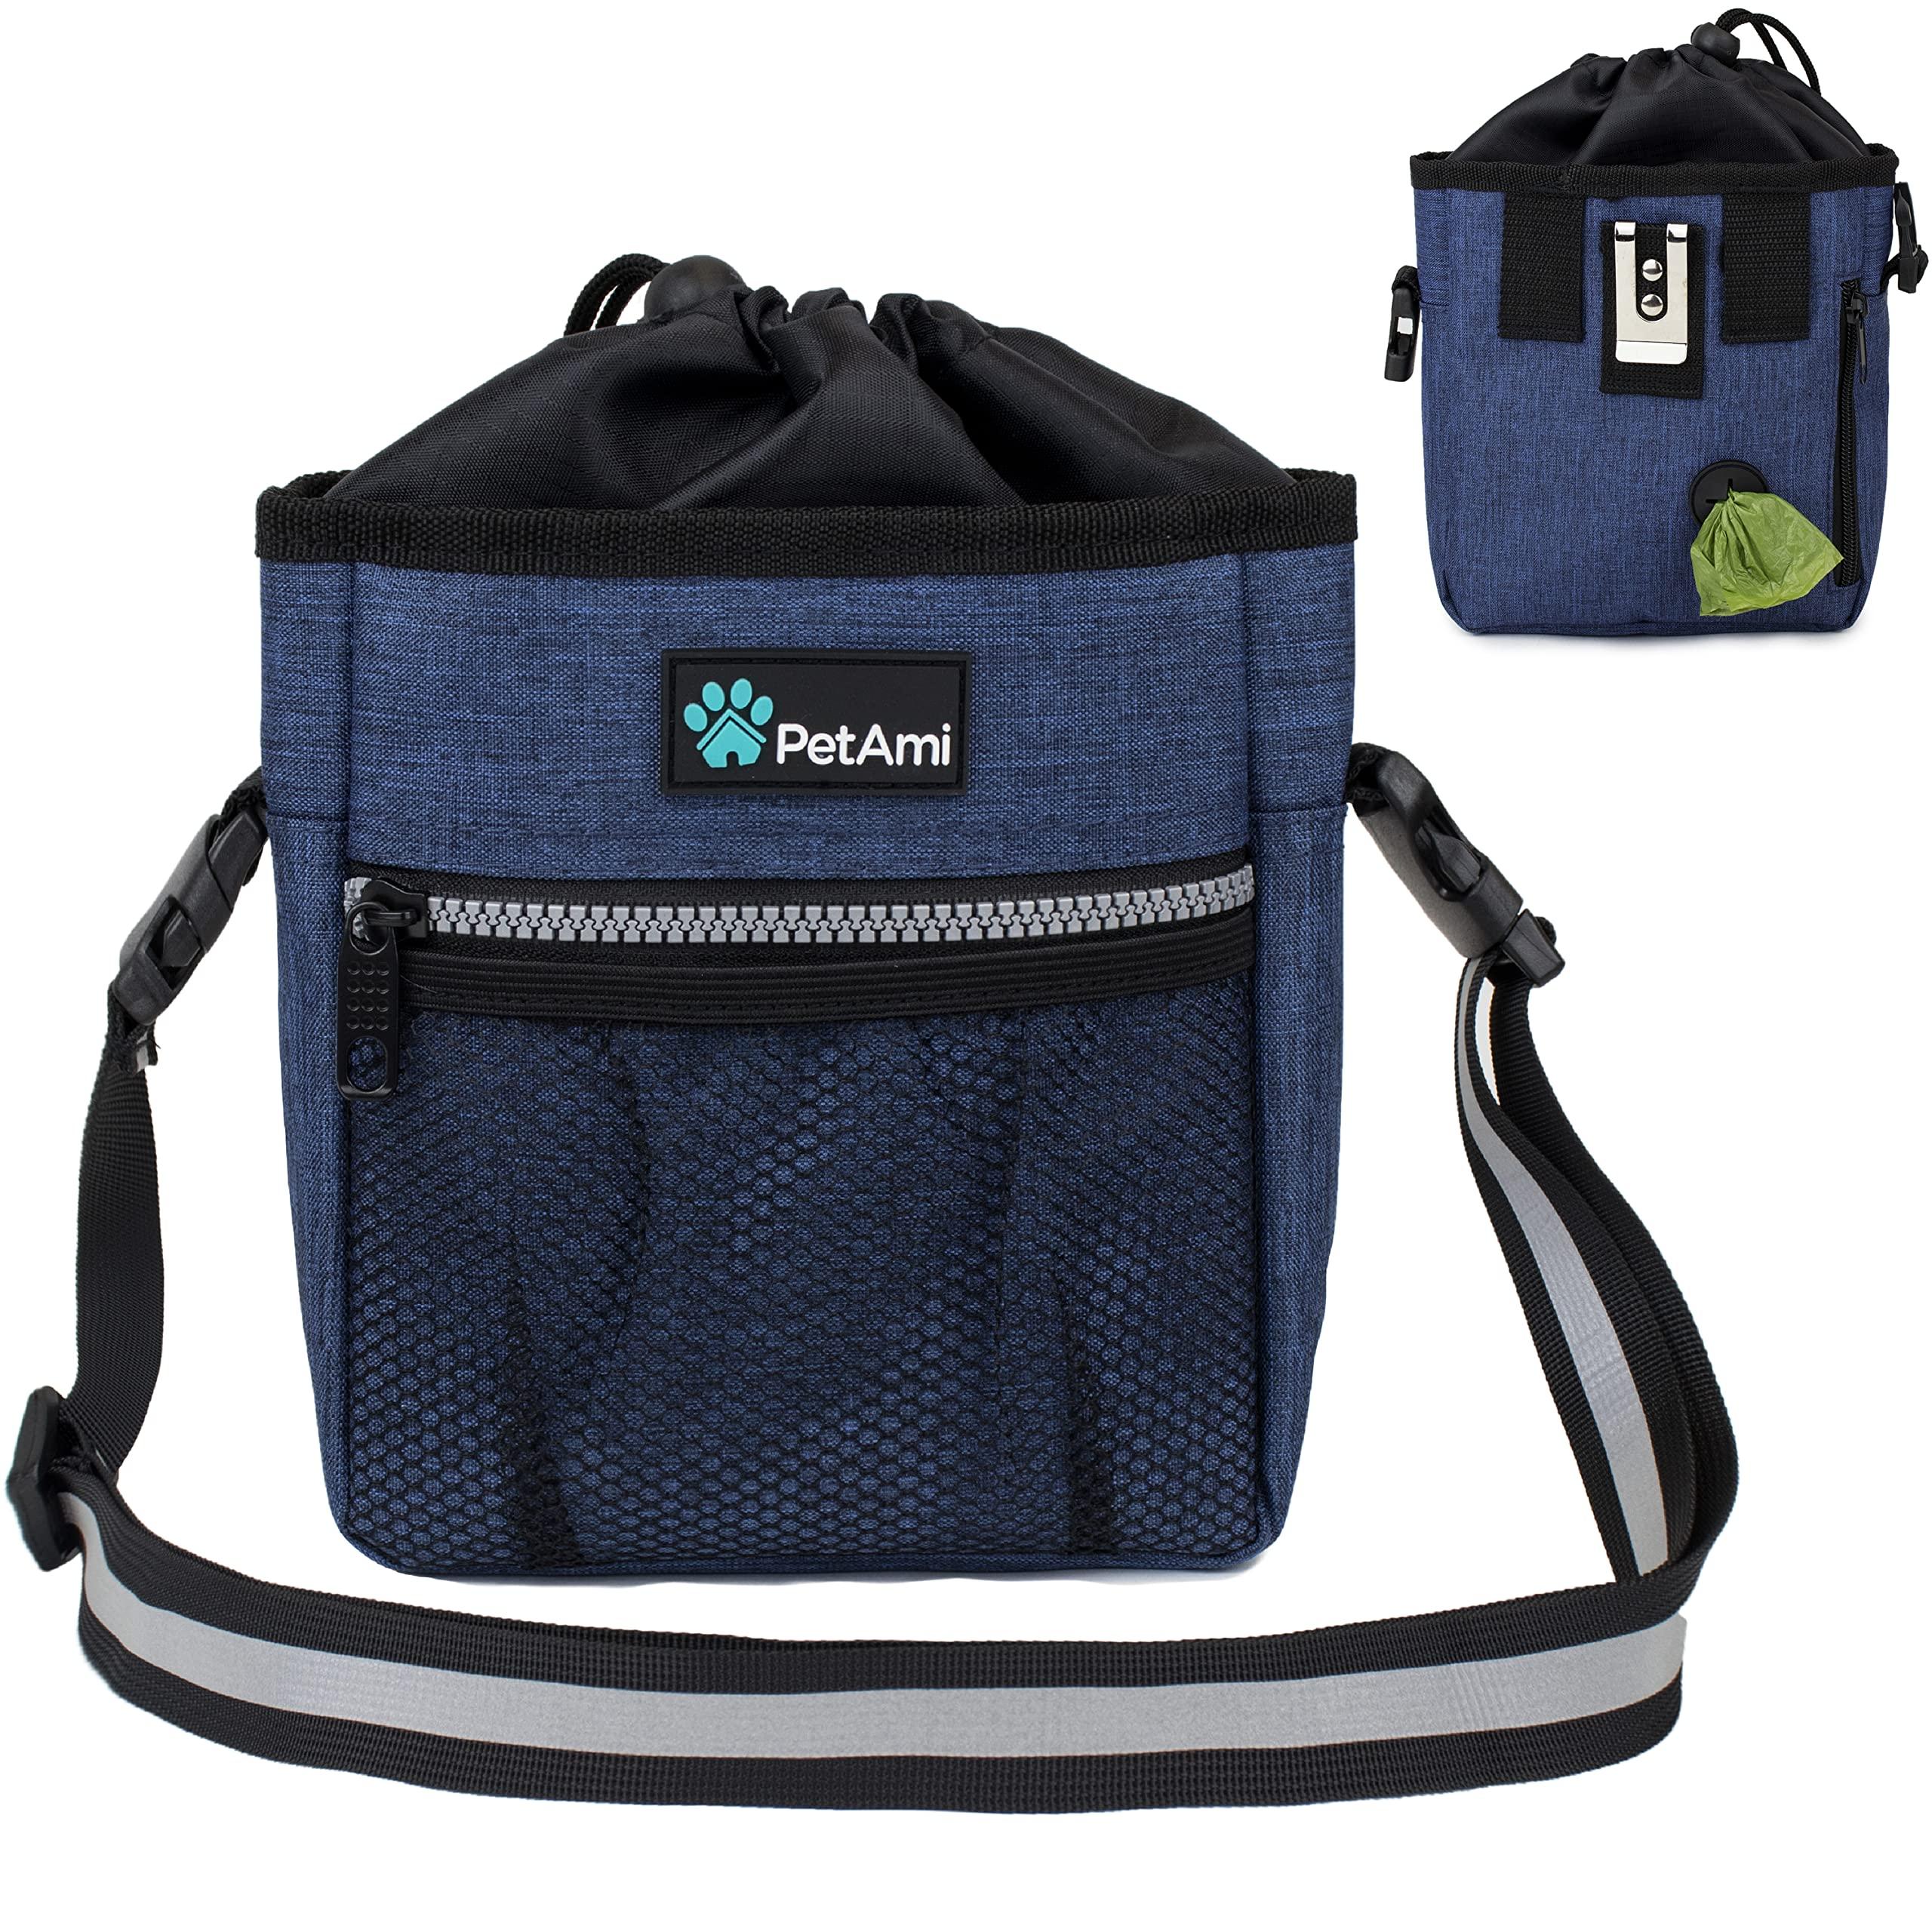 PetAmi Dog Treat Pouch | Dog Training Pouch Bag with Waist Shoulder Strap, Poop Bag Dispenser and Collapsible Bowl | Treat Training Bag for Treats, Kibbles, Pet Toys | 3 Ways to Wear (Heather Navy)